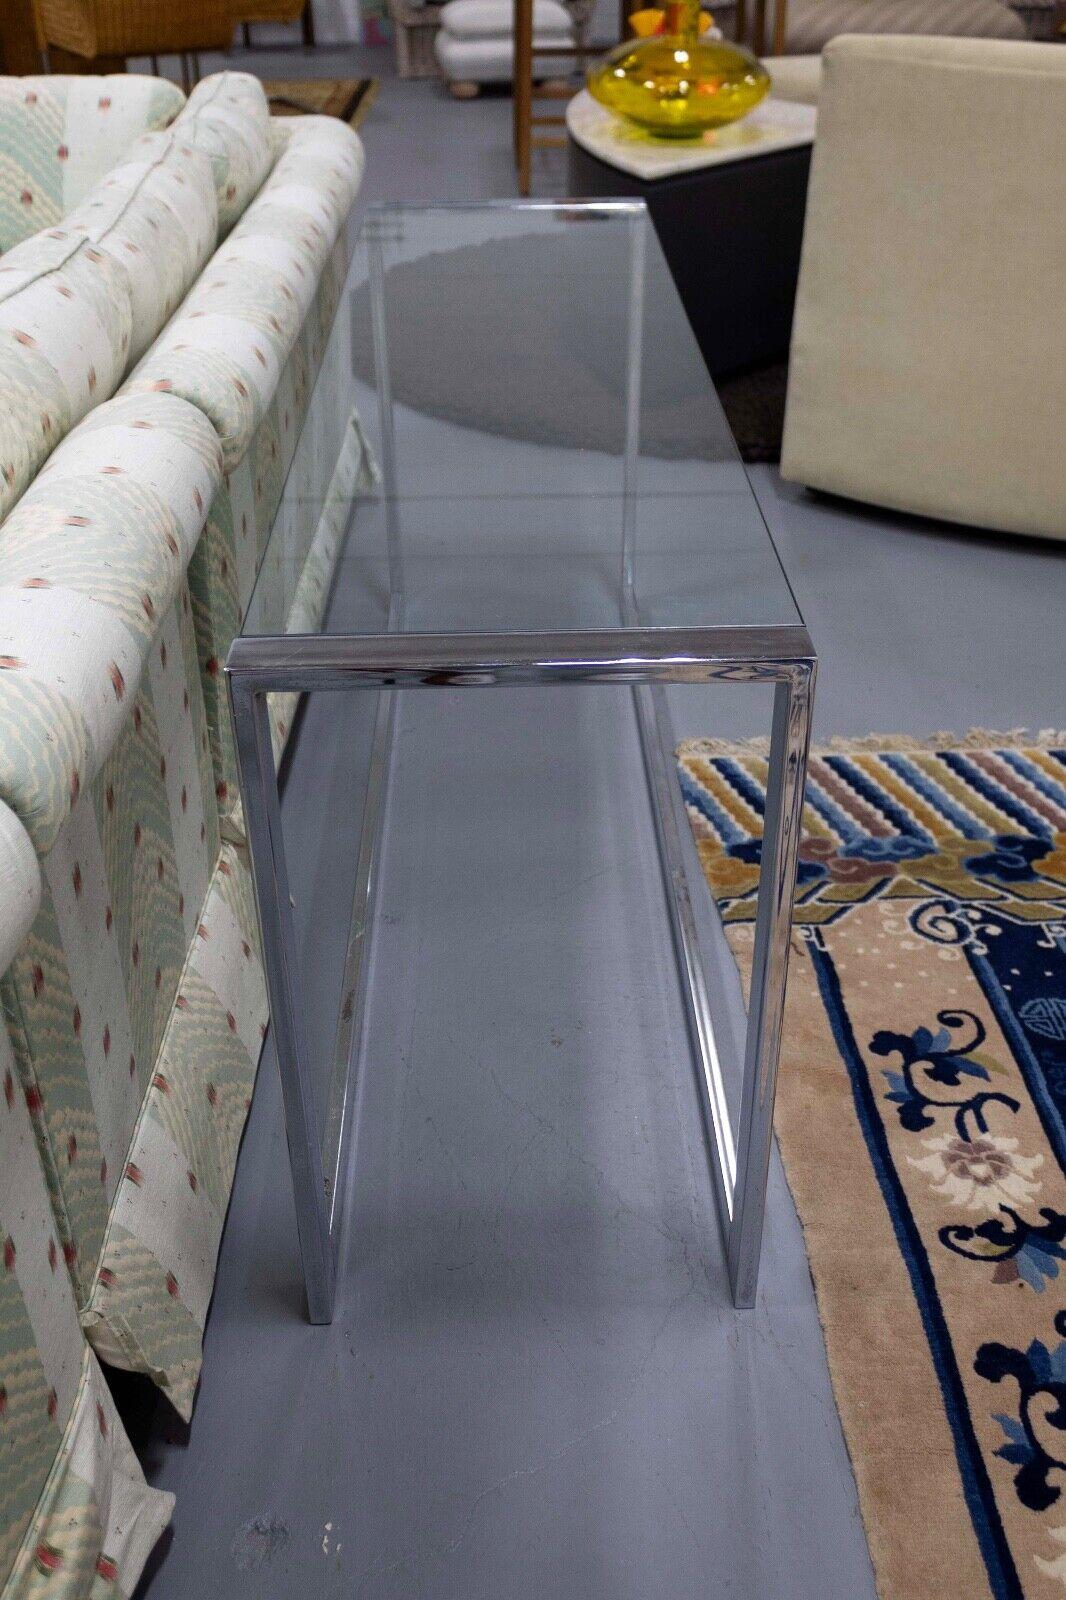 Milo Baughman Chrome and Glass Rectangle Console Table Contemporary Modern In Good Condition For Sale In Keego Harbor, MI